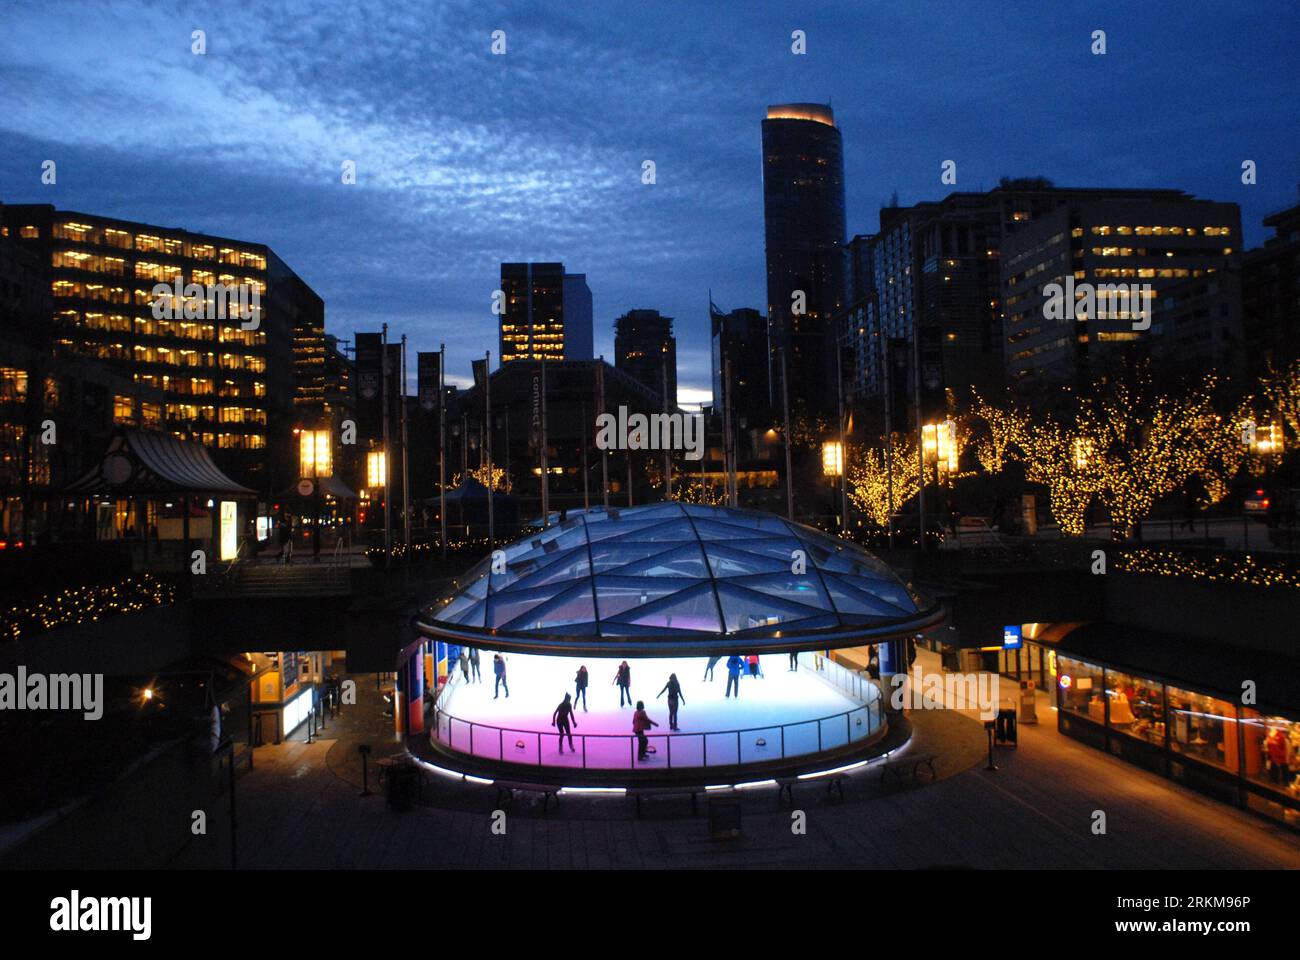 Bildnummer: 56567993  Datum: 01.12.2011  Copyright: imago/Xinhua (111202) -- VANCOUVER, Dec. 2, 2011 (Xinhua) -- enjoy skating at Robson Square Ice Rink, that opened for a season in Vancouver, Canada, Dec. 1, 2011. Robson Square Ice Rink is the only free public outdoor ice rink in downtown Vancouver. It is open every day until the end of February. (Xinhua/Sergei Bachlakov) CANADA-VANCOUVER-ICE RINK PUBLICATIONxNOTxINxCHN Gesellschaft Jahreszeit Winter Eislaufbahn Schlittschuh laufen Schlittschuhlaufen xjh x0x 2011 quer      56567993 Date 01 12 2011 Copyright Imago XINHUA  Vancouver DEC 2 2011 Stock Photo